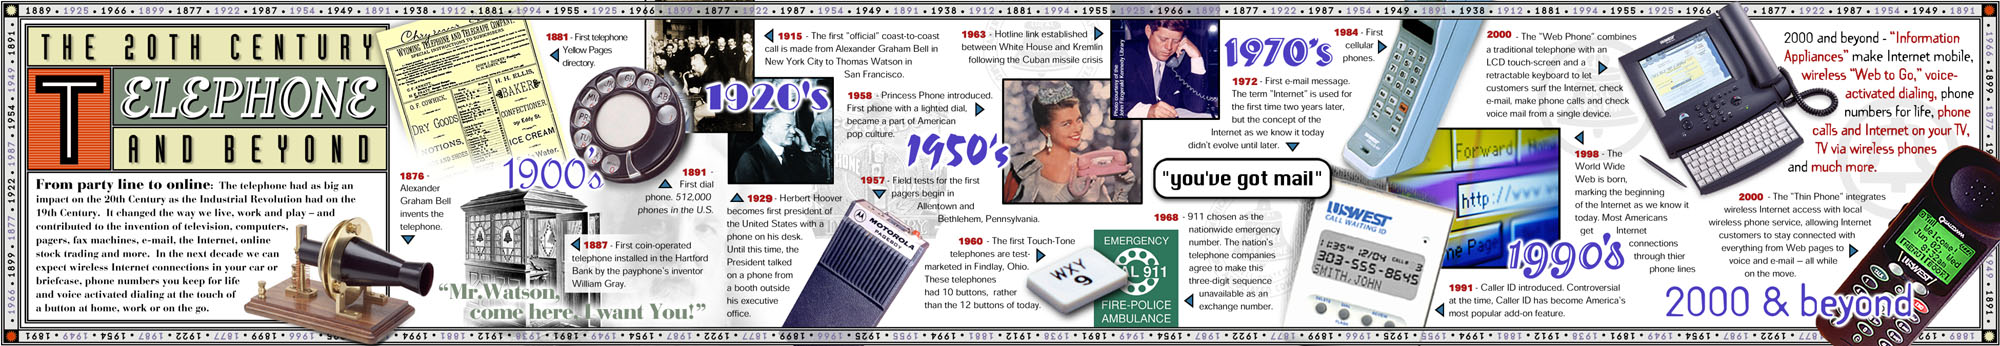 The Telecommunications History Group, Inc. - Timeline